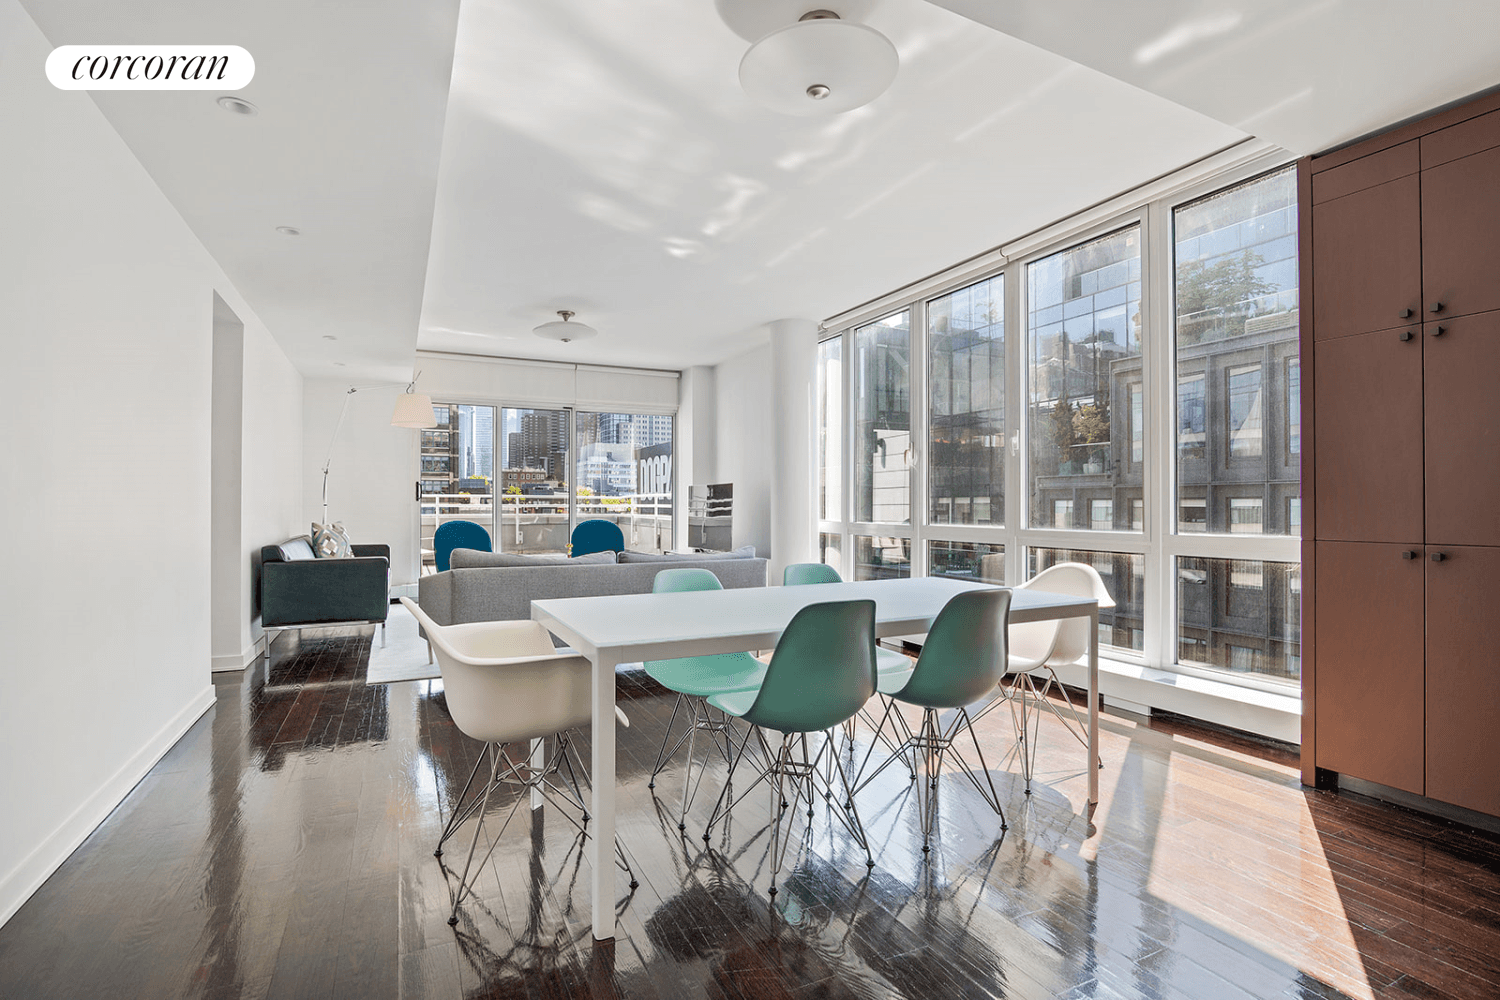 22 RENWICK STREET APT PH2 RENWICK MODERN HUDSON SQUAREFURNISHED 2 TERRACES PRIVATE ENTRANCE W D AMAZING VIEWS This is a tremendous opportunity to lease for 6 12 months an elegant, ...